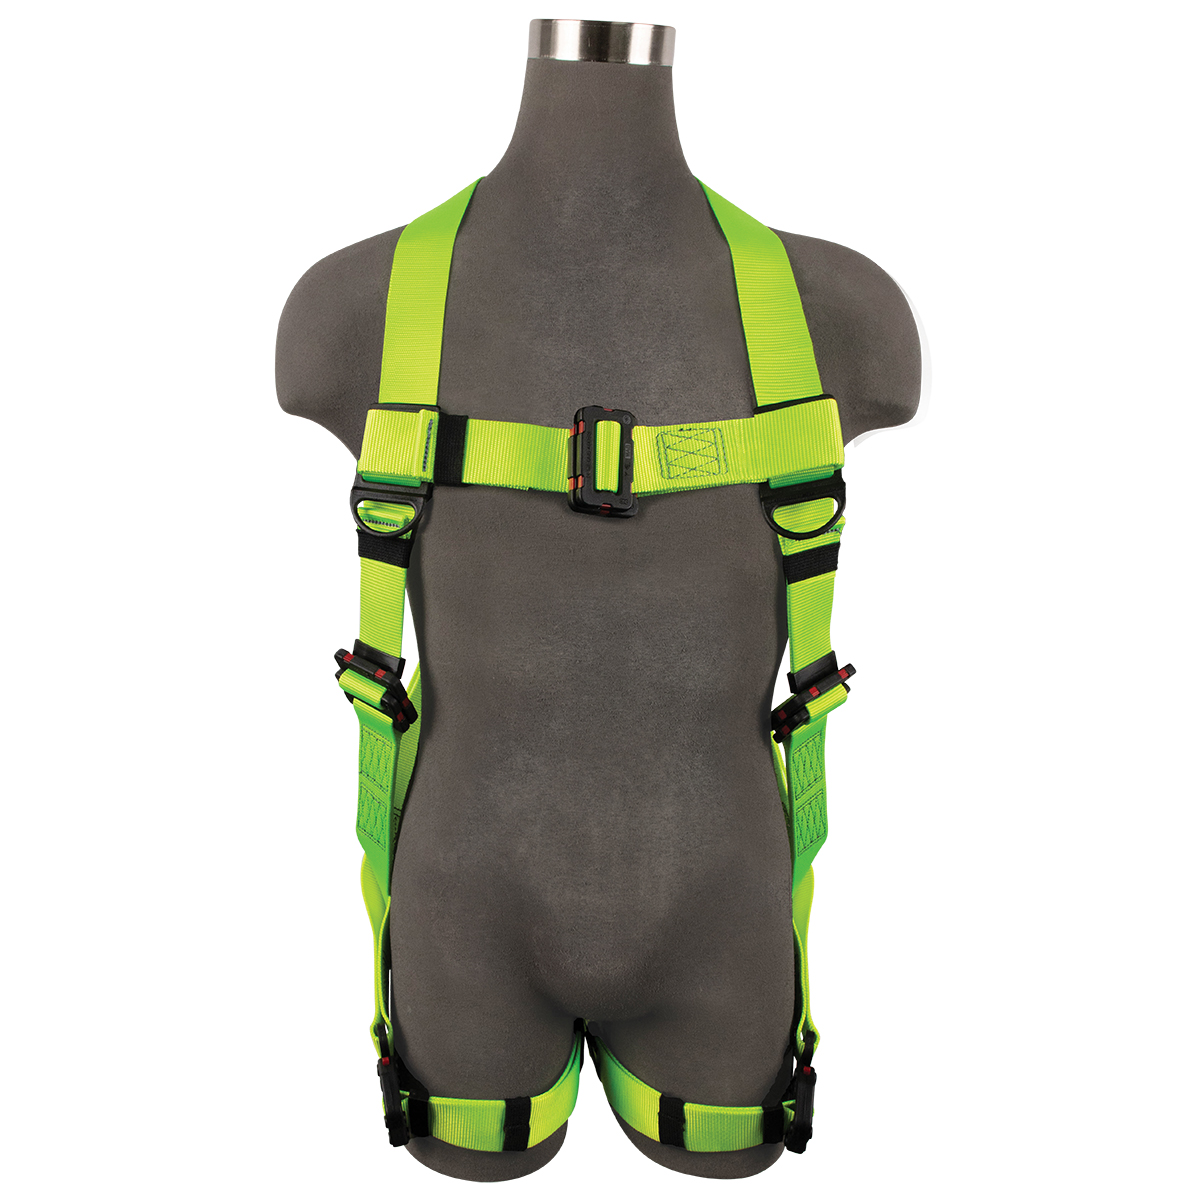 SAFEWAZE PRO+ Arc Flash Dielectric Harness with Pass through Dielectric on Chest and Quick-Connect Legs: S/M